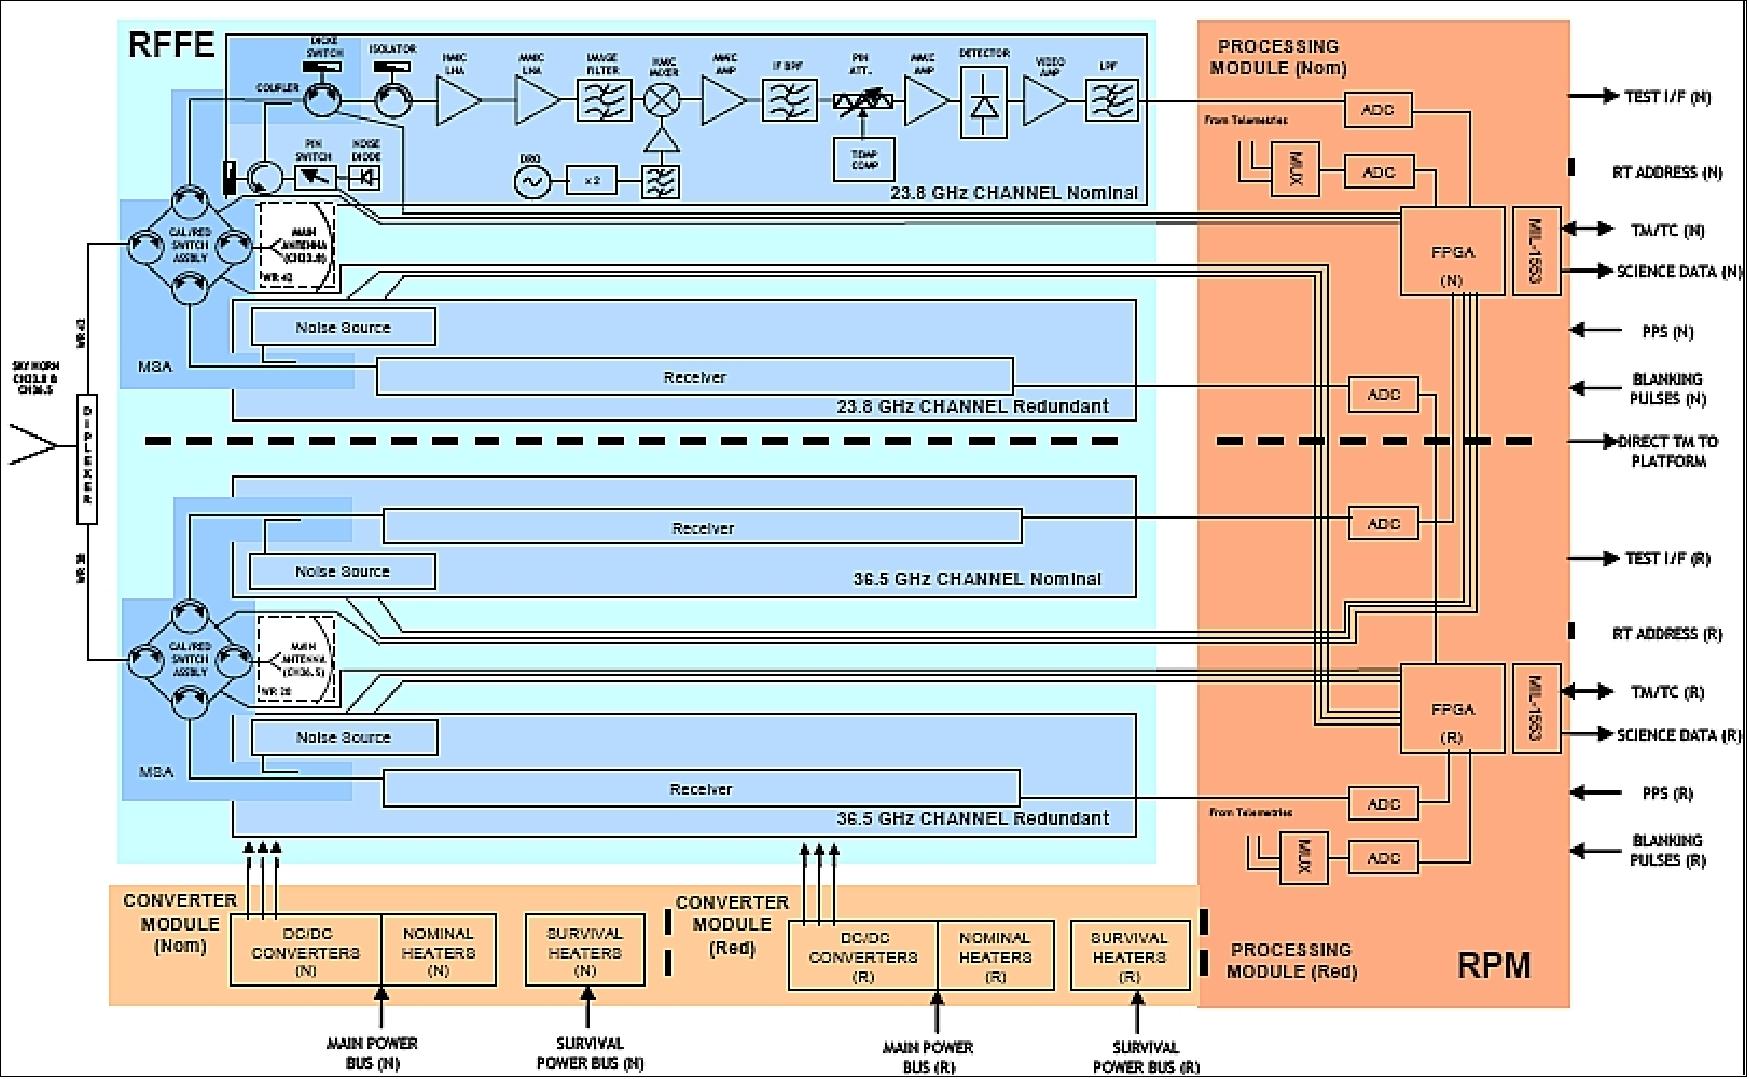 Figure 99: Block diagram of the detailed functional architecture of the MWR instrument (image credit: ESA)